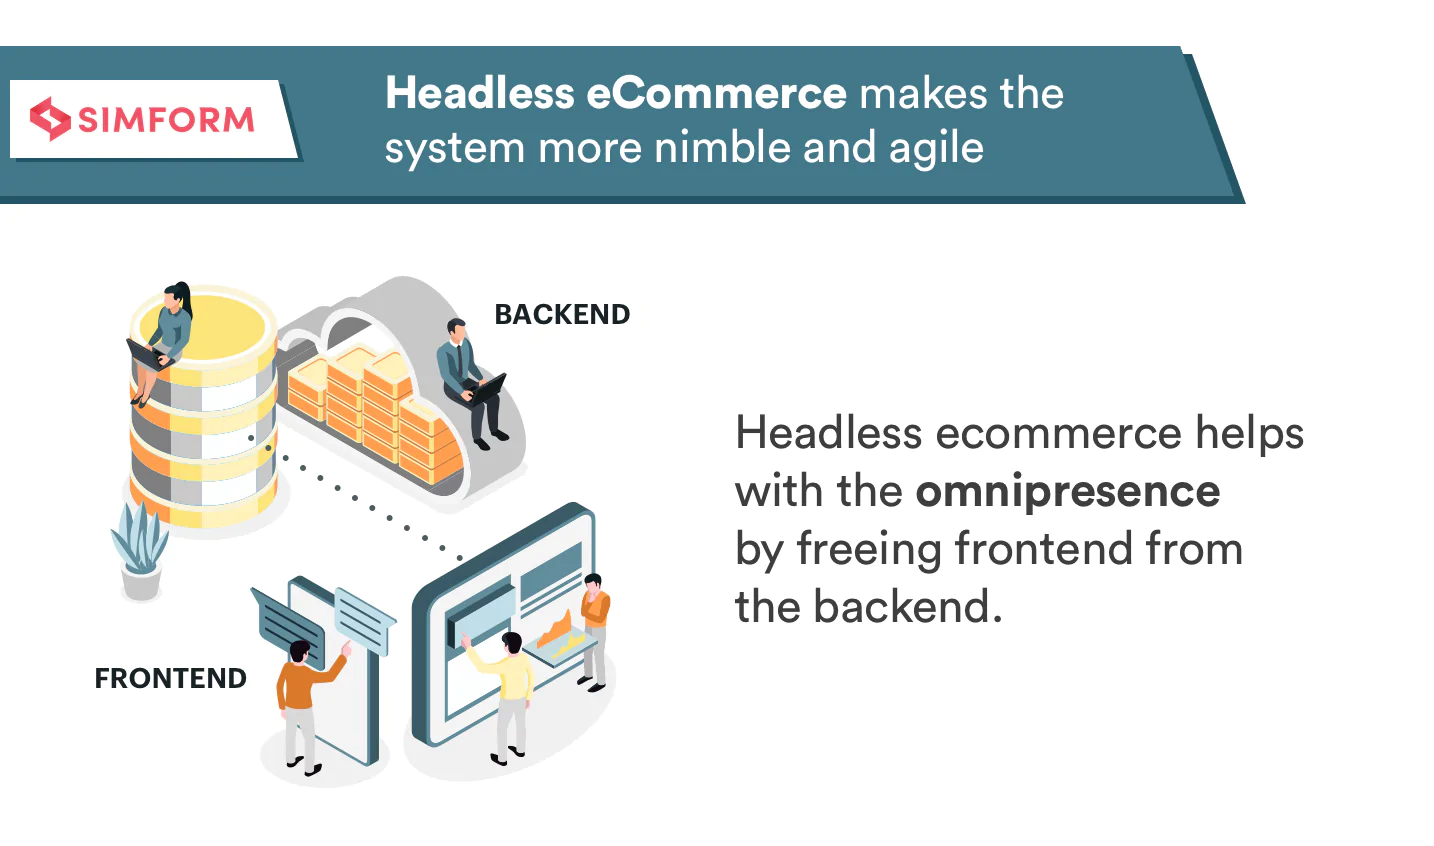 Headless eCommerce makes the system more nimble and agile